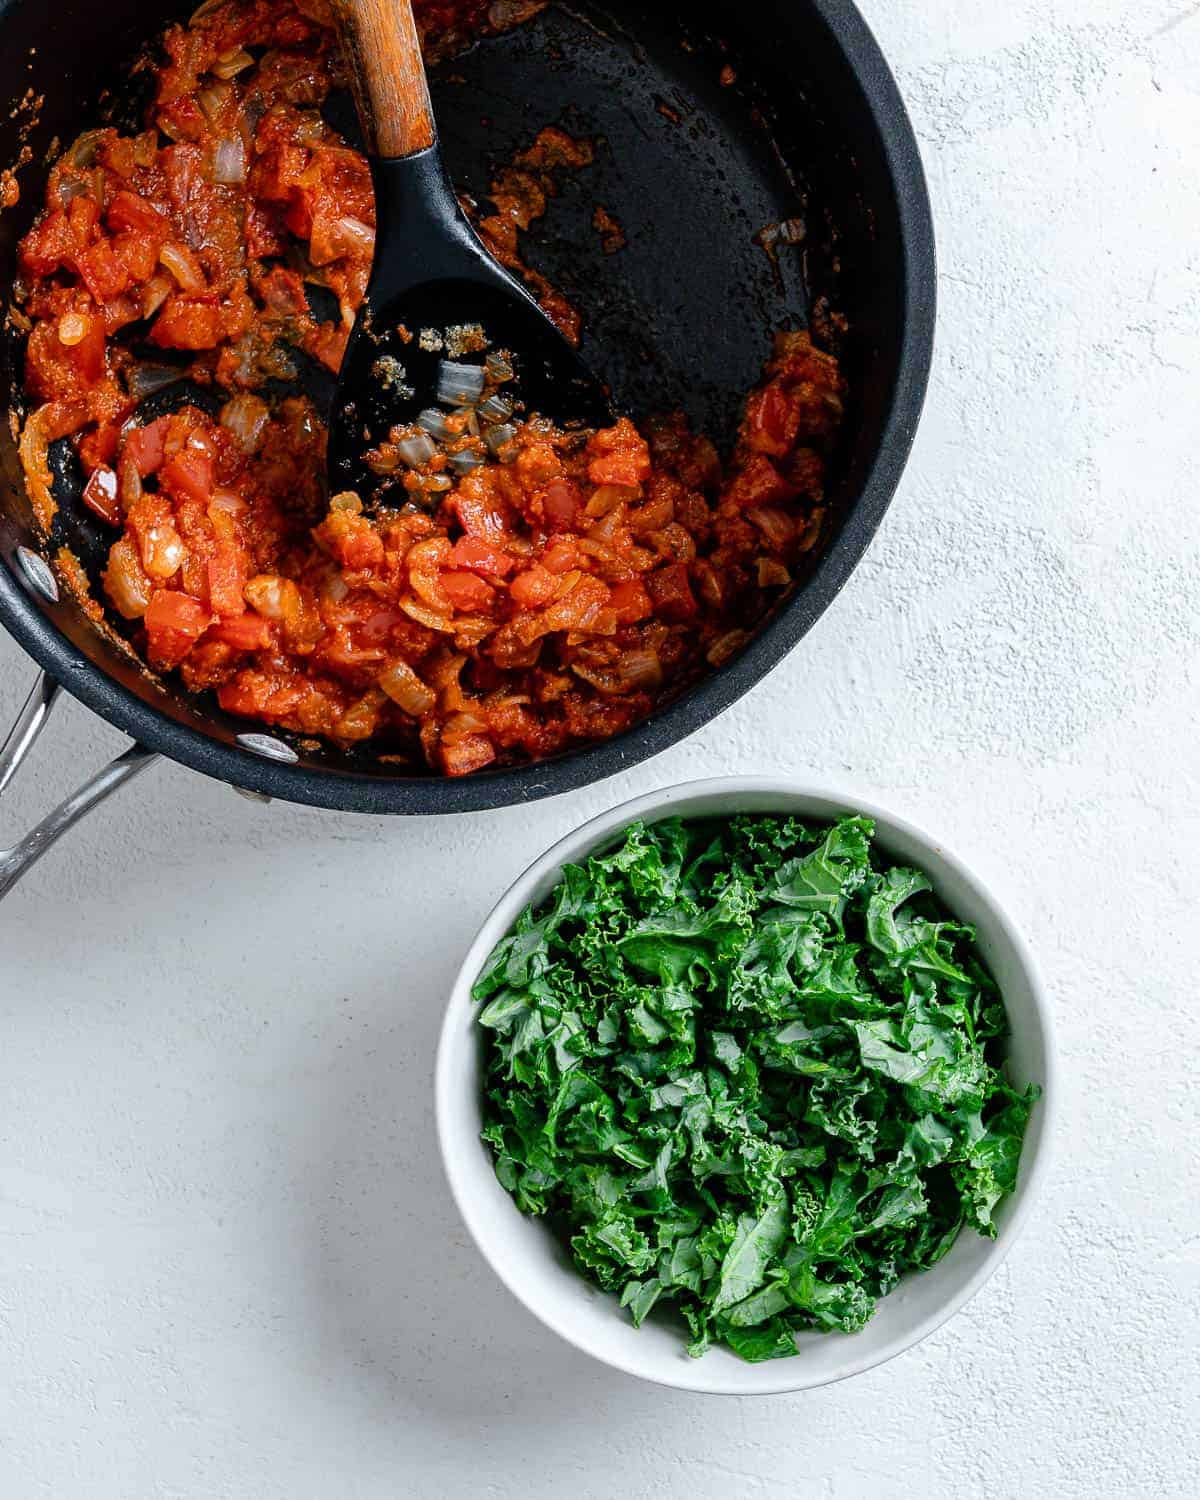 process of tomatoes and marinara in pan. alongside a white bowl of greens